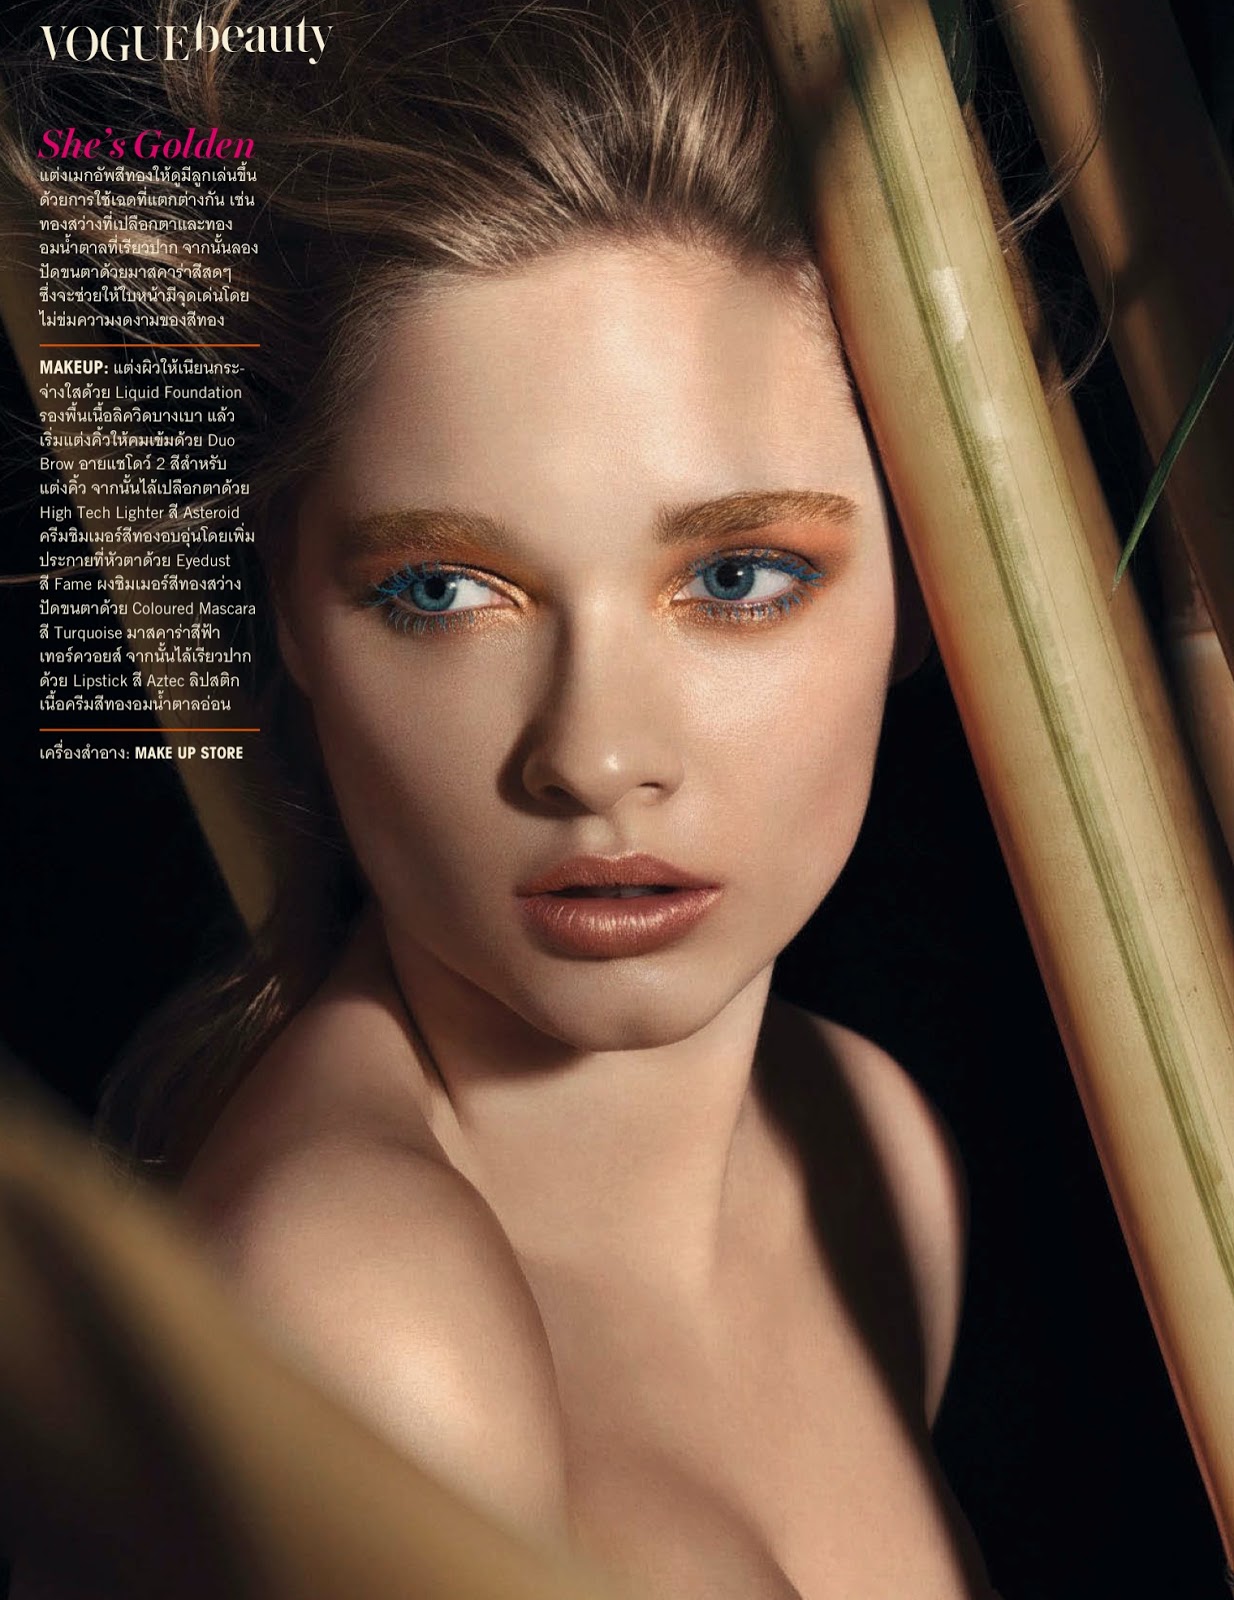 Beegee-Margenyte-by-Michael-Leis-for-Vogue-Thailand-April-2013-5